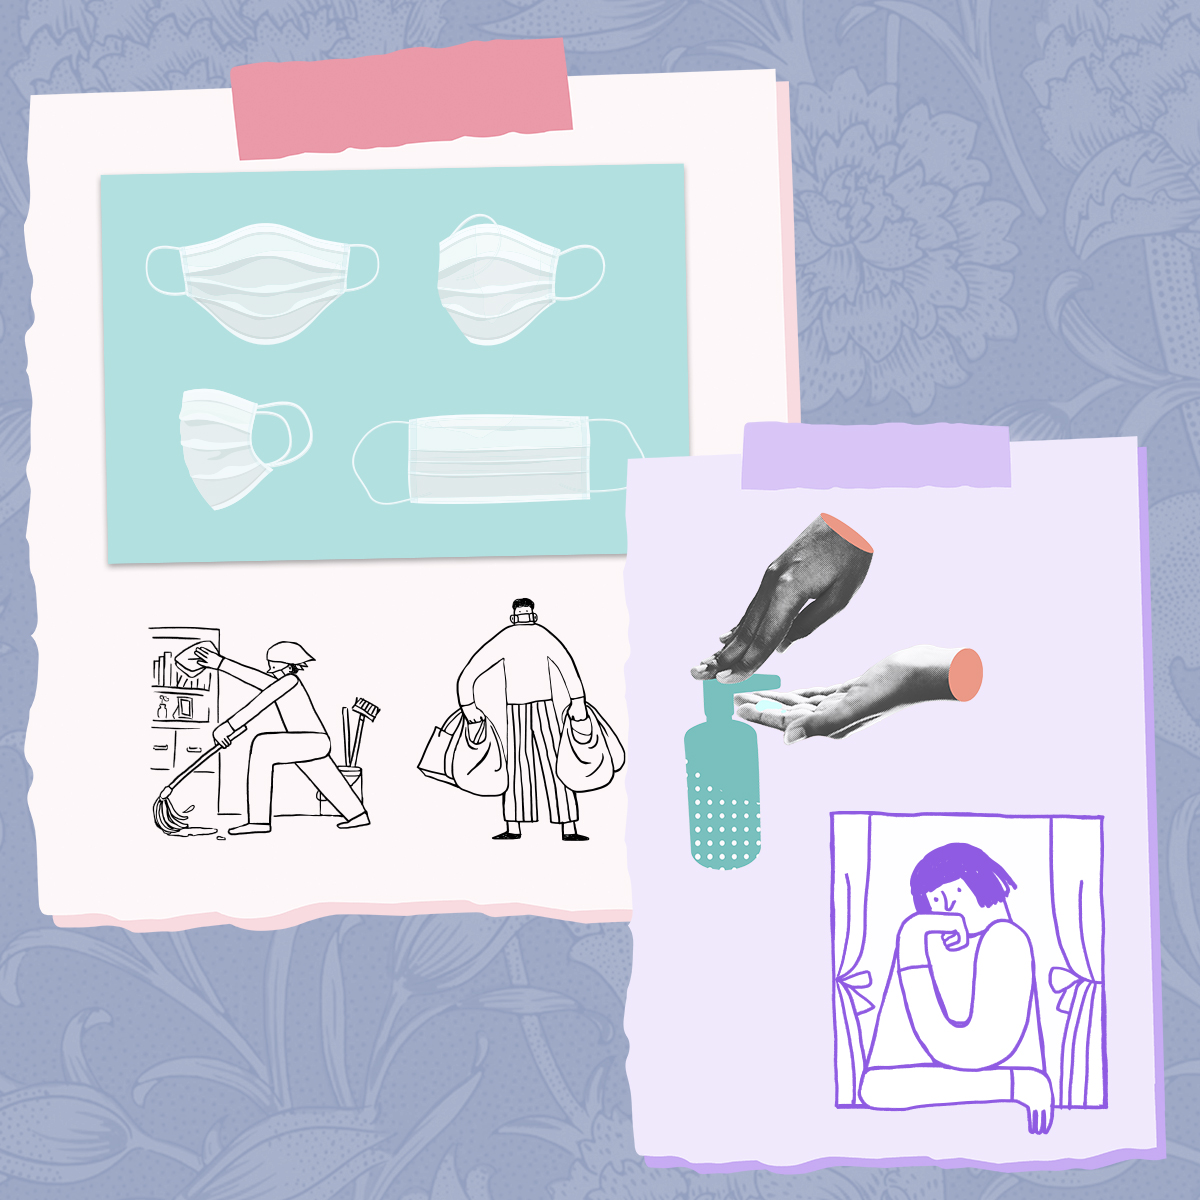 Illustrations of COVID-19 related scenes: face masks, washing hands, cleaning, grocery shopping, sitting alone by a window